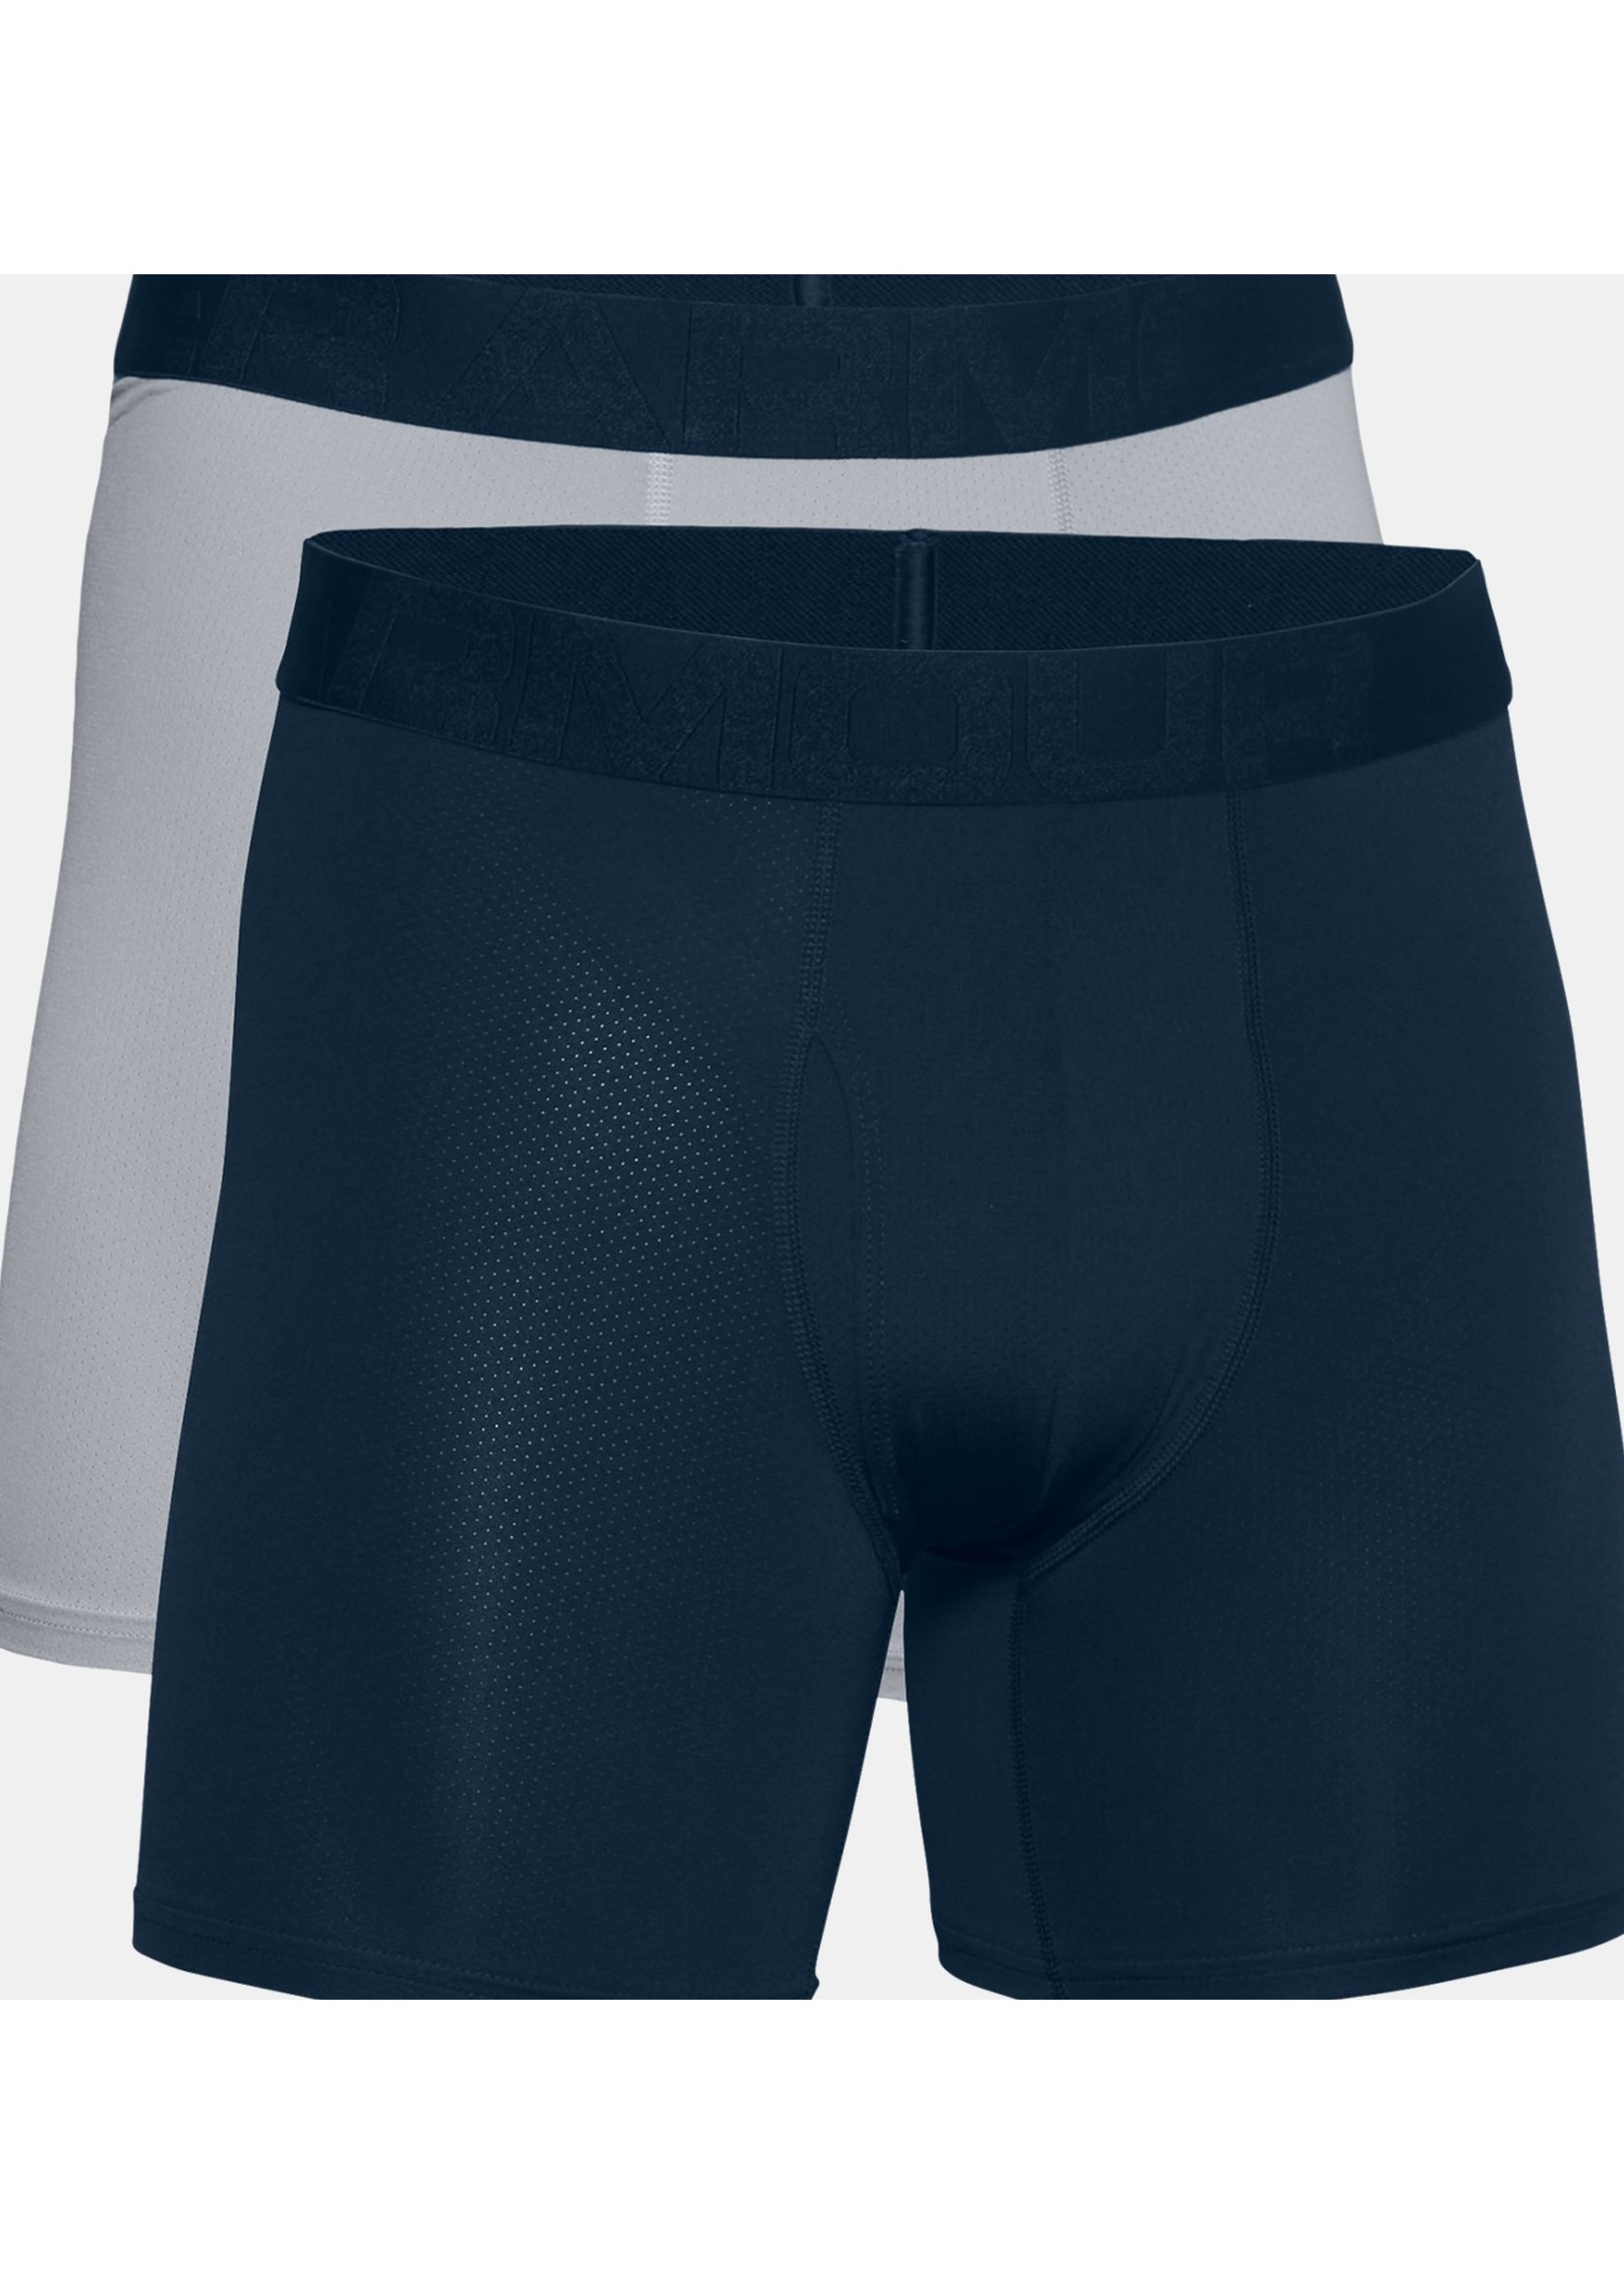 Under Armour Armourvent Mesh 6 Boxerjock Academy Blue 1326770-408 - Free  Shipping at LASC